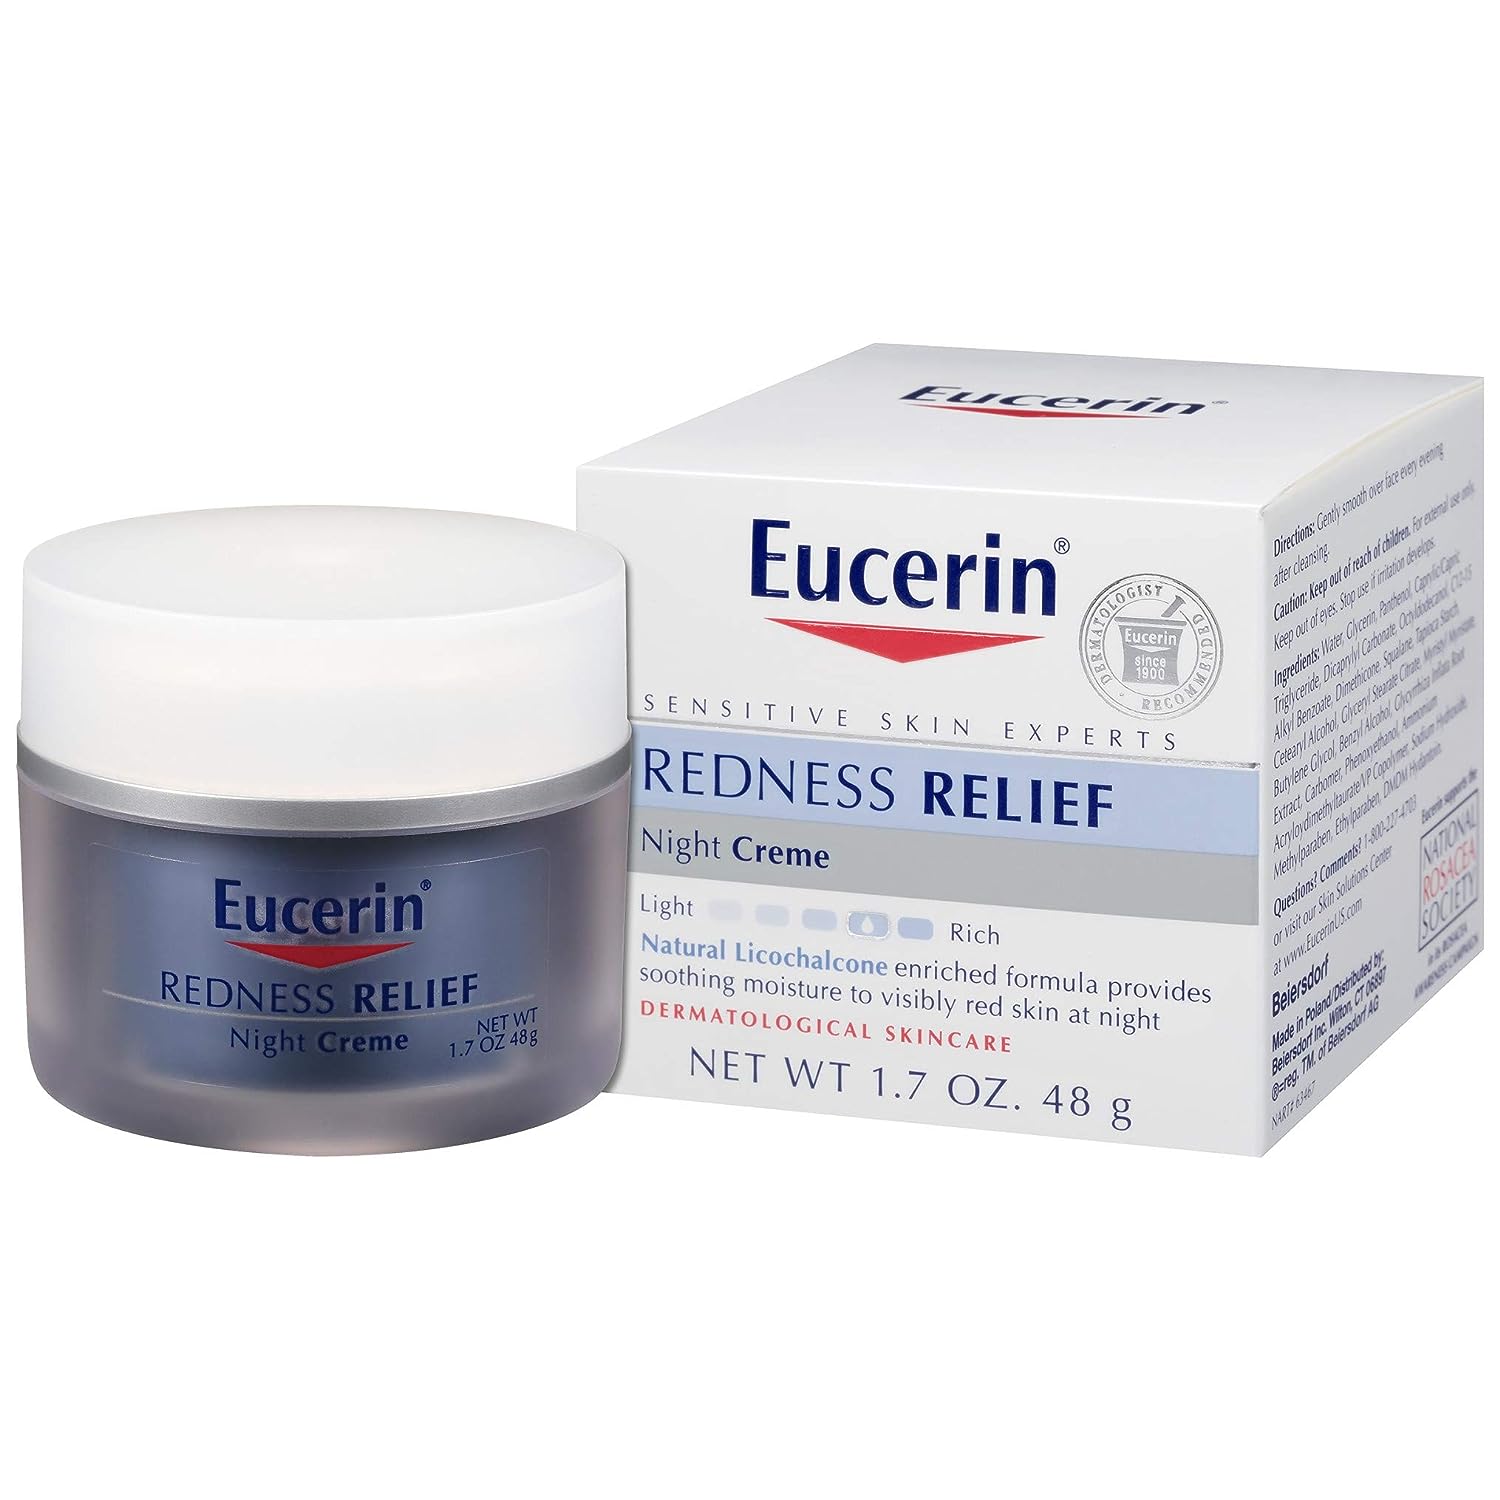 Eucerin Redness Relief Night Creme - Gently Hydrates To Reduce Redness-Prone Skin At Night - 1.7  Jar